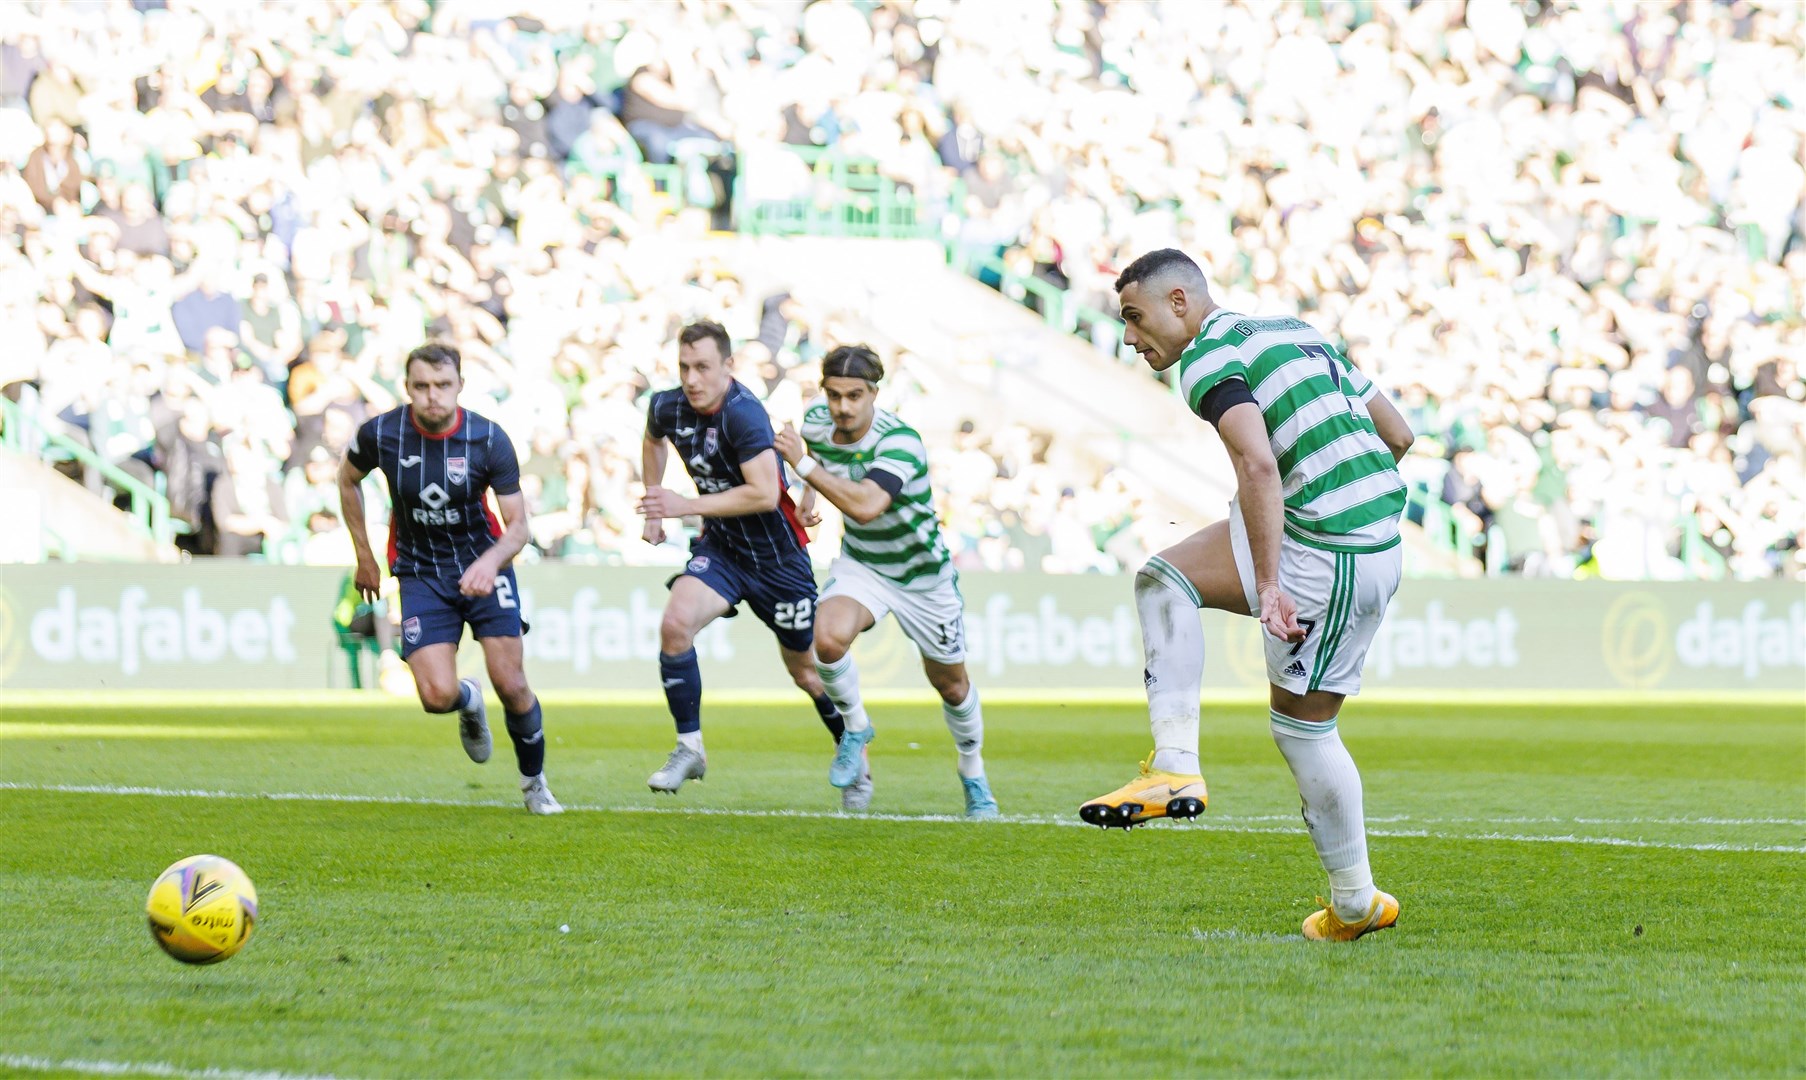 Celtic’s Giorgios Giakoumakis scored from the penalty spot to complete his hat trick against Ross County. Picture: Kenny Ramsay